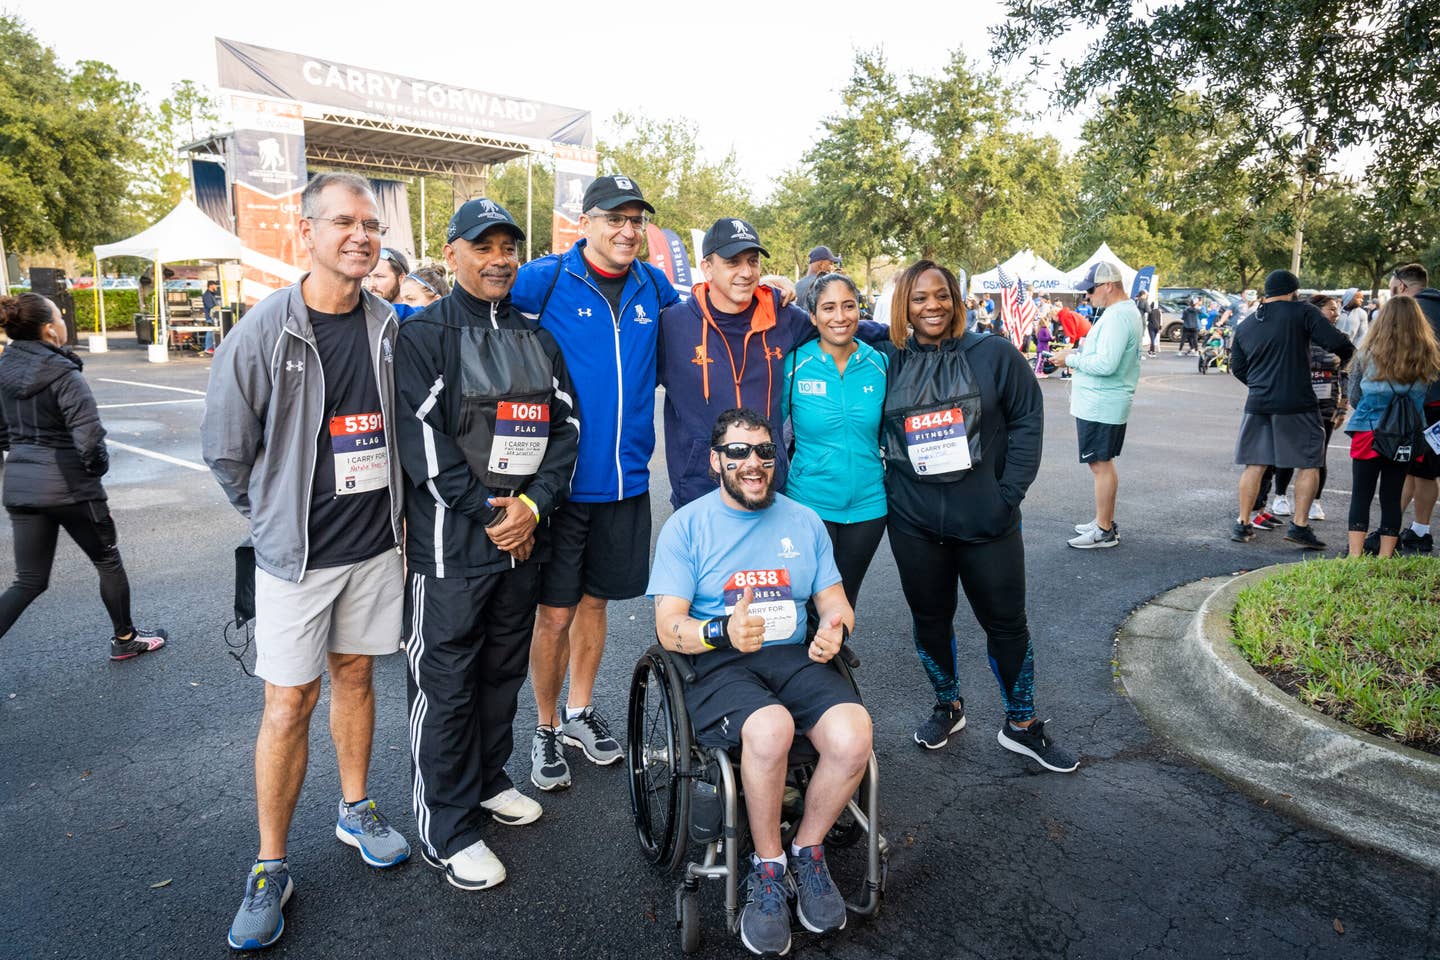 Linnington (middle, blue jacket) at a WWP event. Photo credit Wounded Warrior Project.